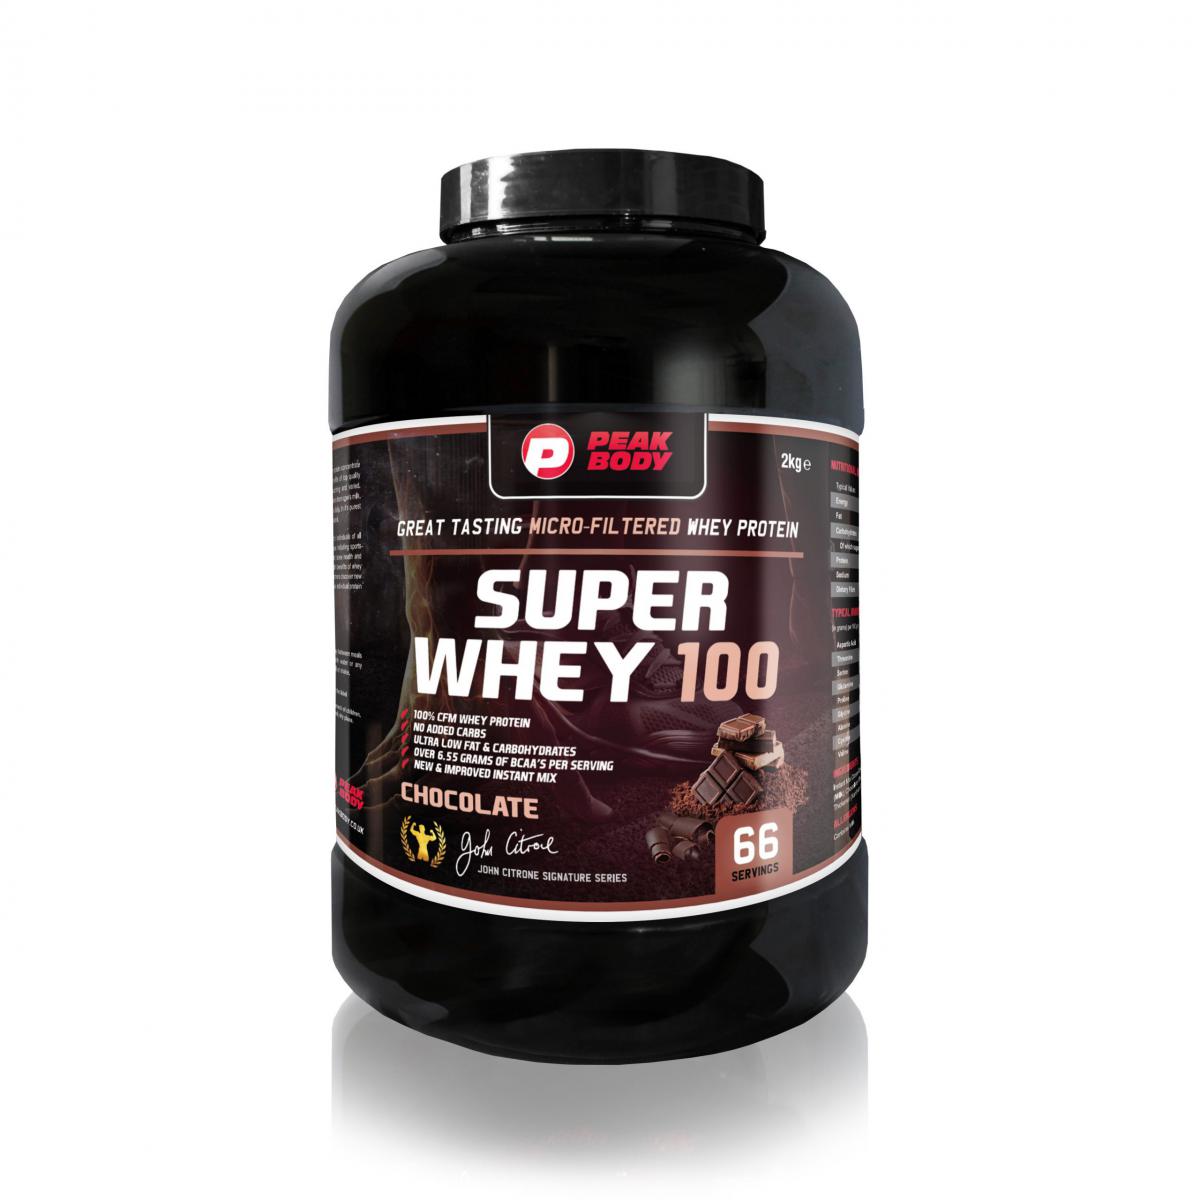 Superwhey 100: Getting the quality protein you need for maximum muscle growth.